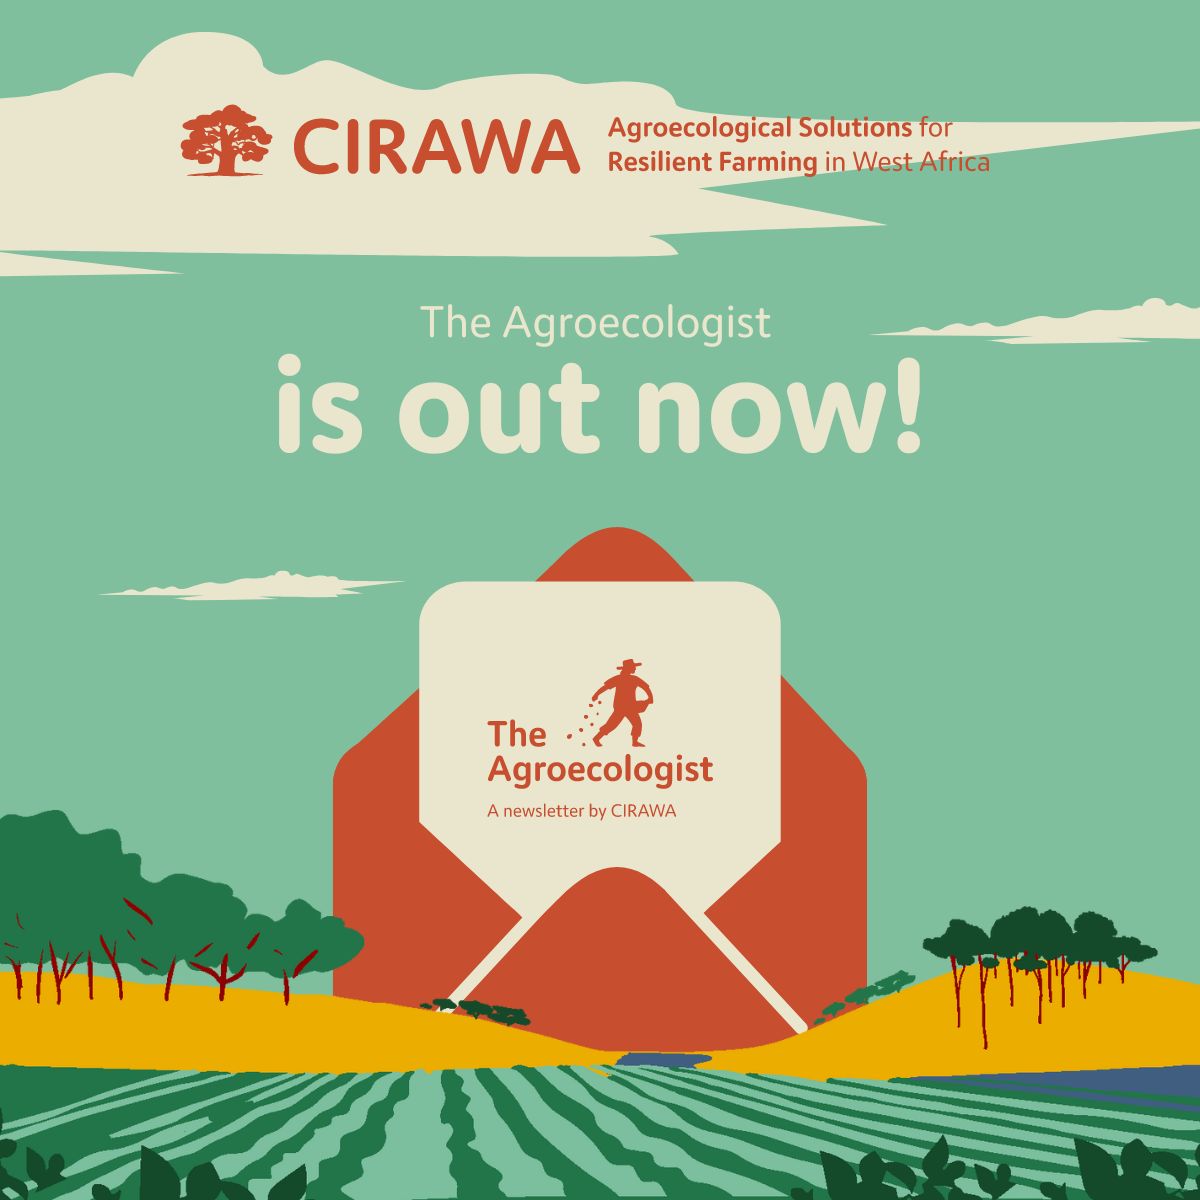 📢We're thrilled to announce that the latest edition of 'The Agroecologist,' CIRAWA’s newsletter, is now available! In this edition, we proudly unveil our latest video filmed in #CapeVerde, the latest news & much more!🆕

📰Dive into the latest issue here: mailchi.mp/ce5367cf13b9/t…